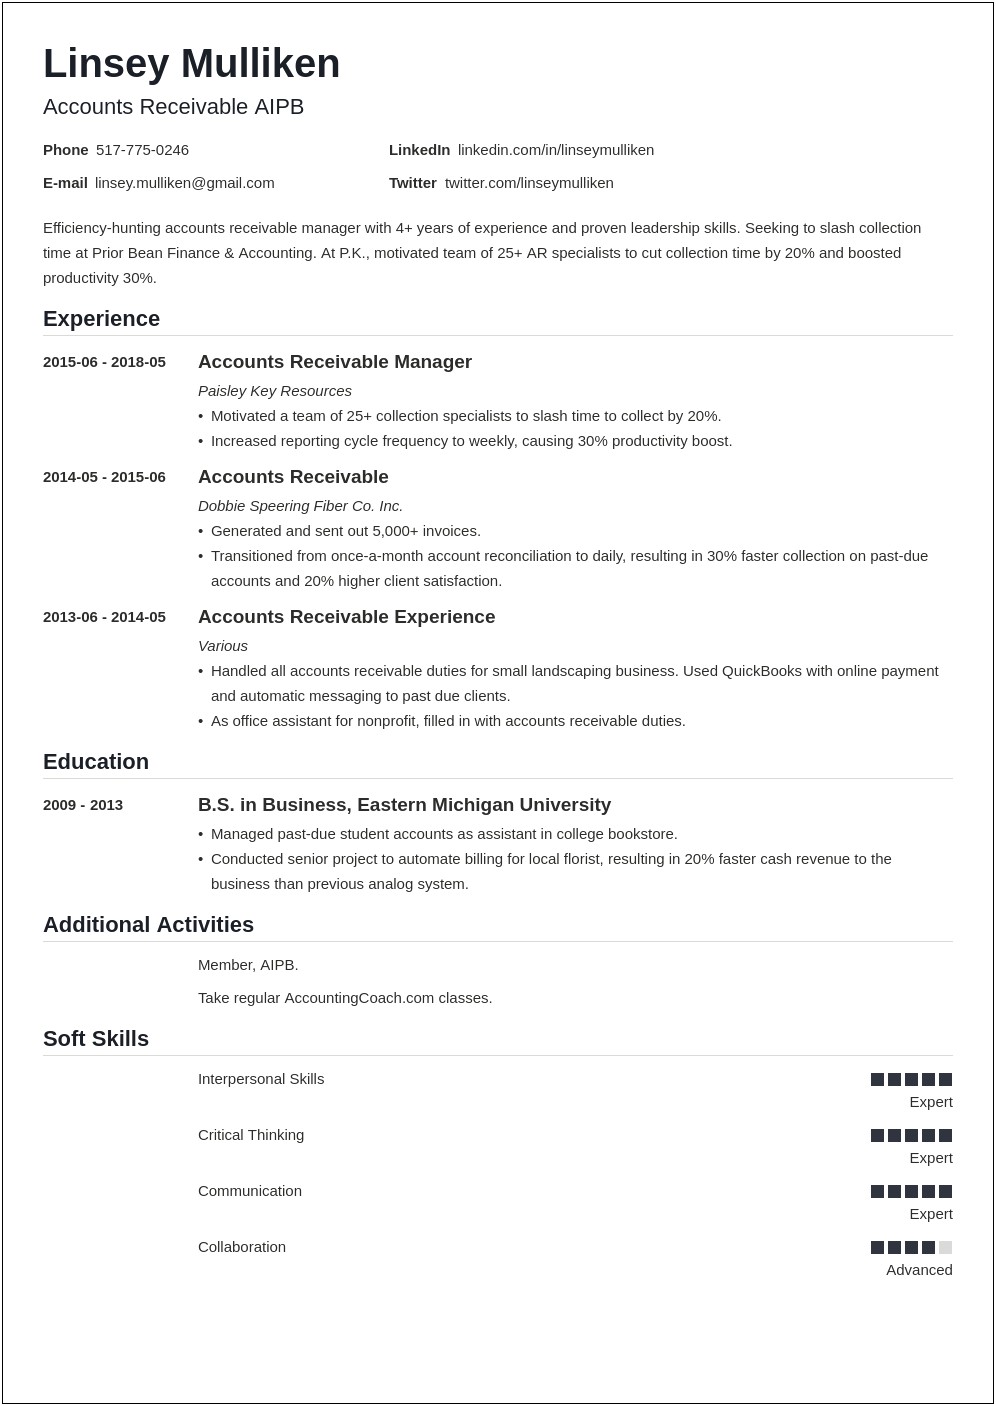 Best Resume Format For Accounts Receivable